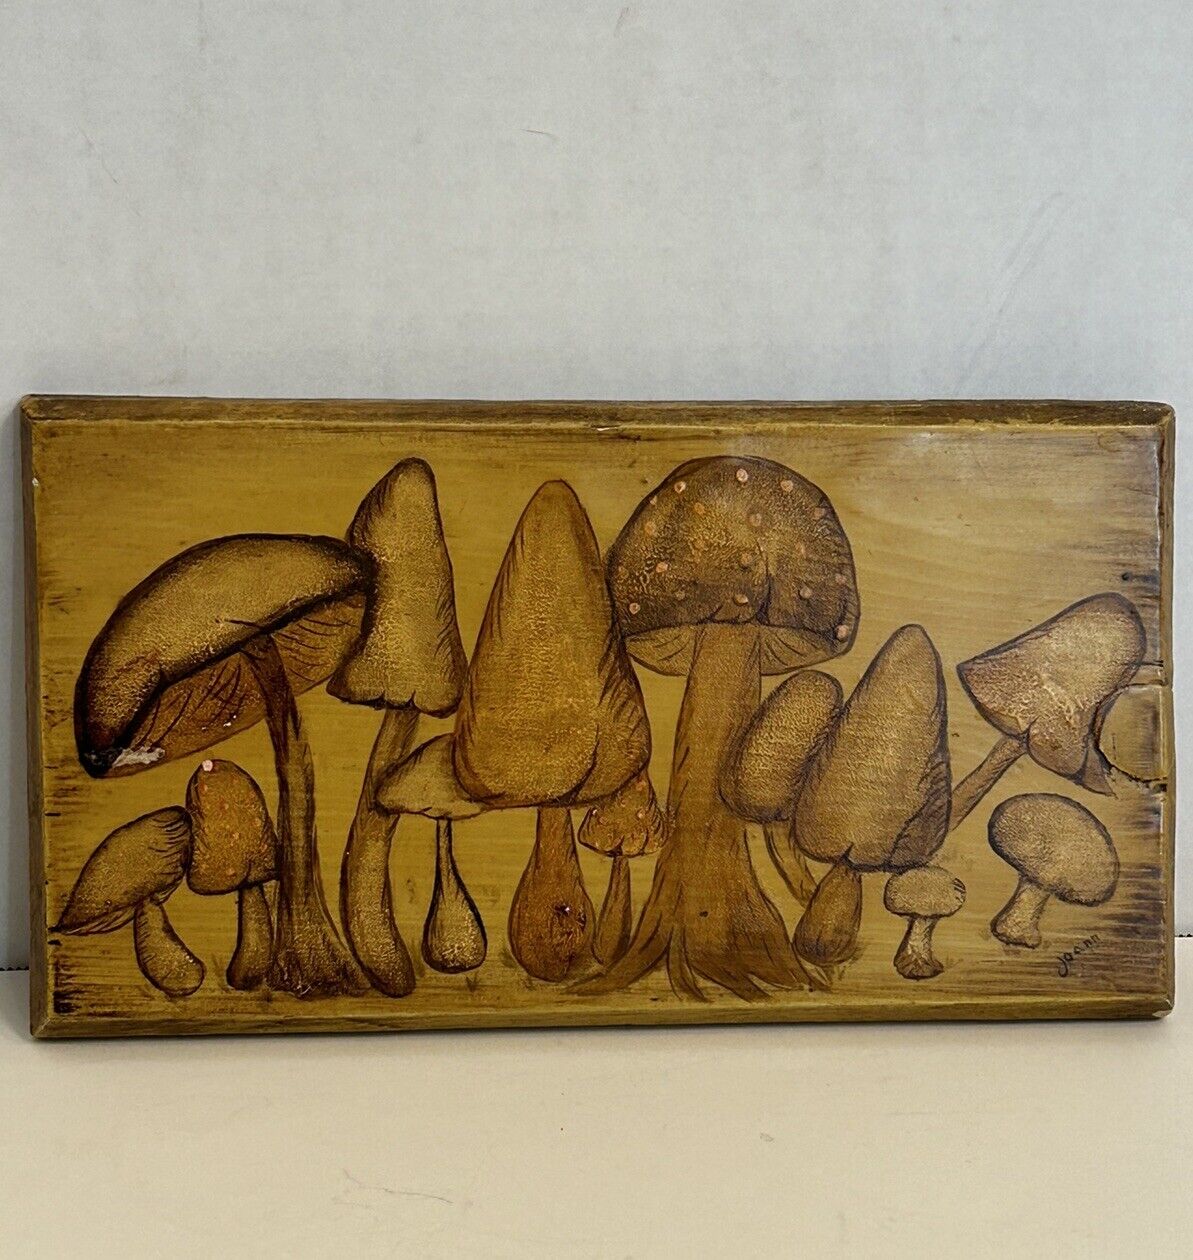 Vintage MCM Mushroom Tole  Painting Wooden Wall Plaque 11” x 6” Signed 1970's